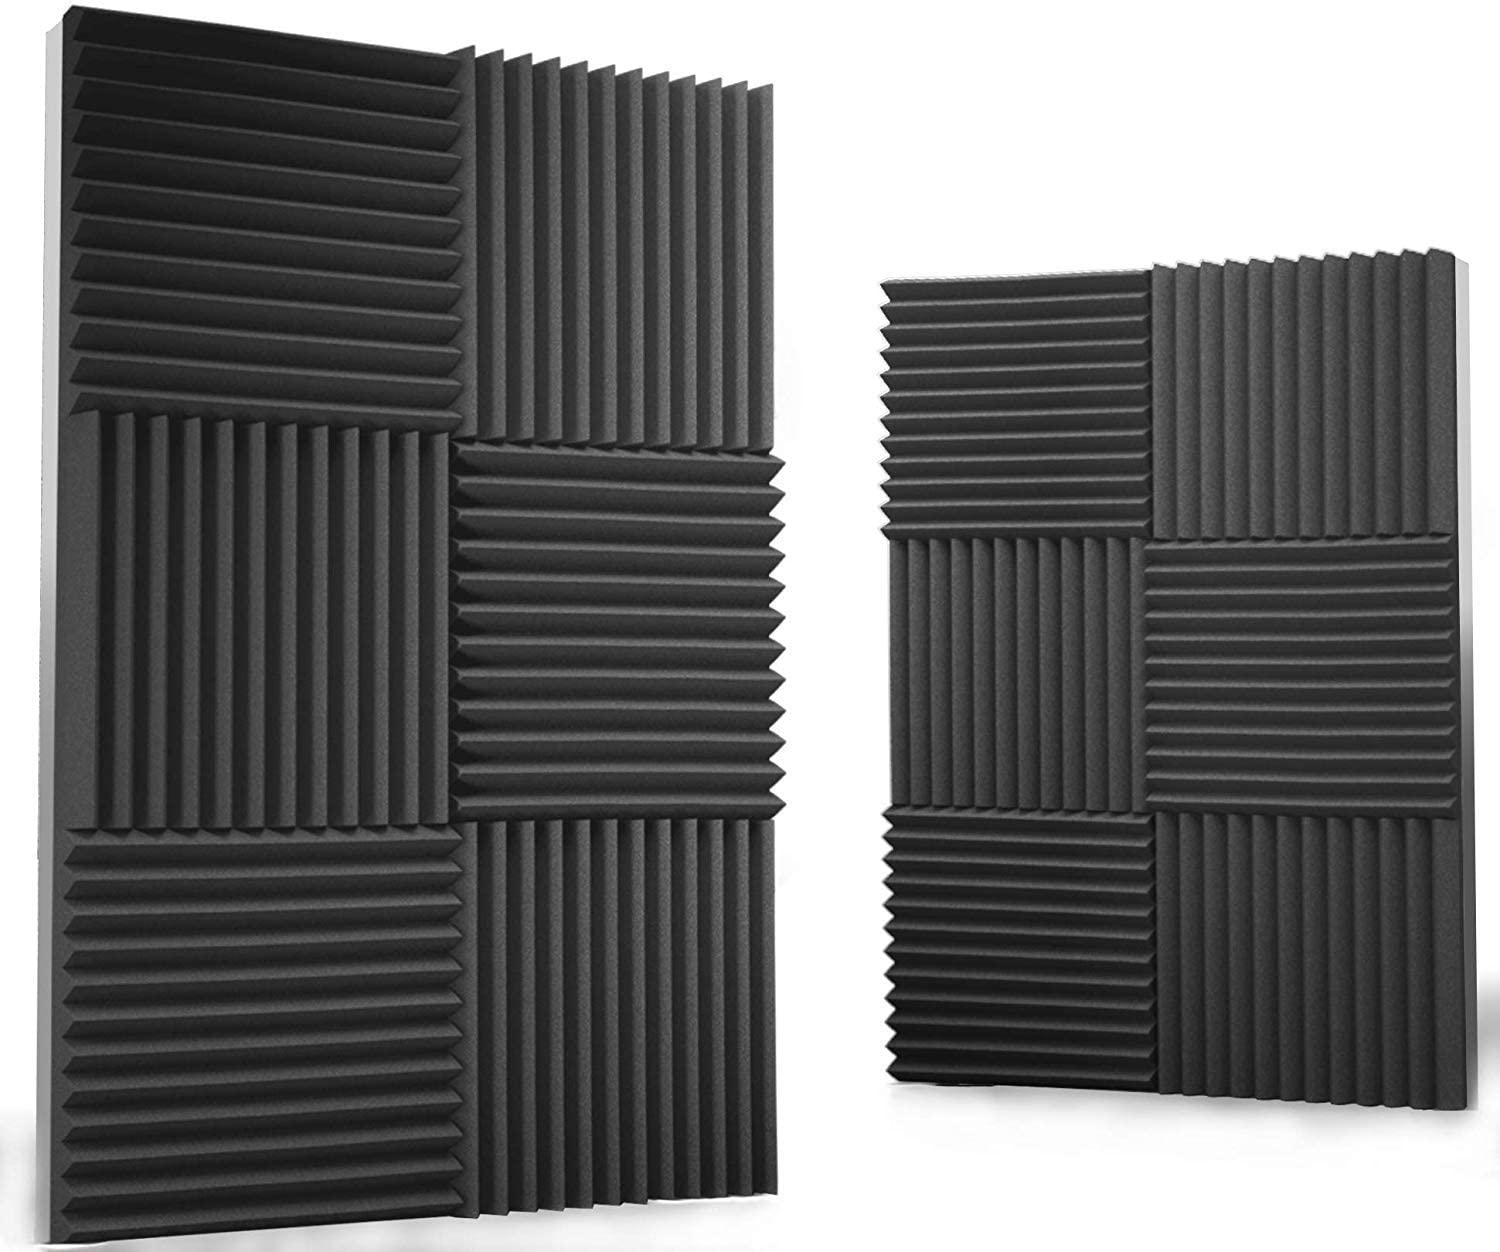 siless wall panels for sound deadening